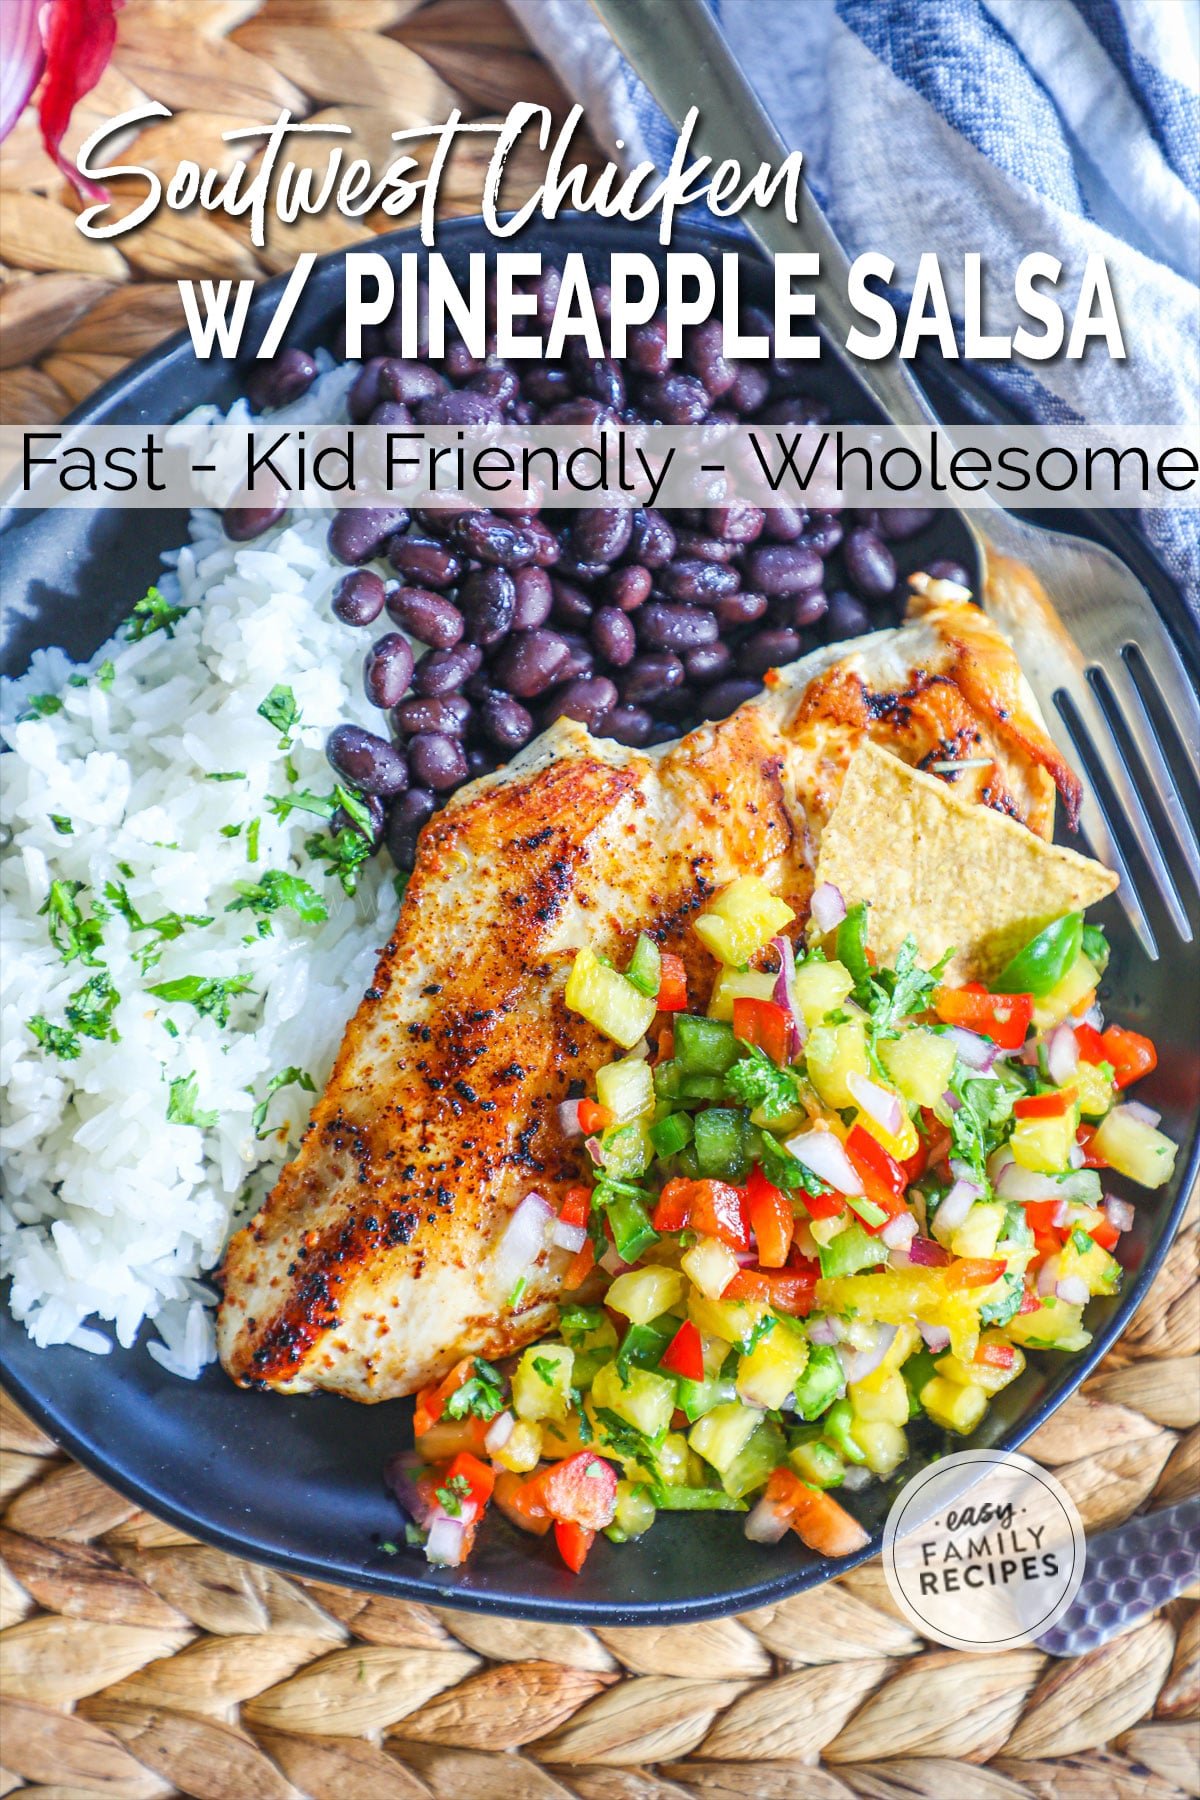 Seasoned Chicken breast with pineapple salsa served with rice and beans